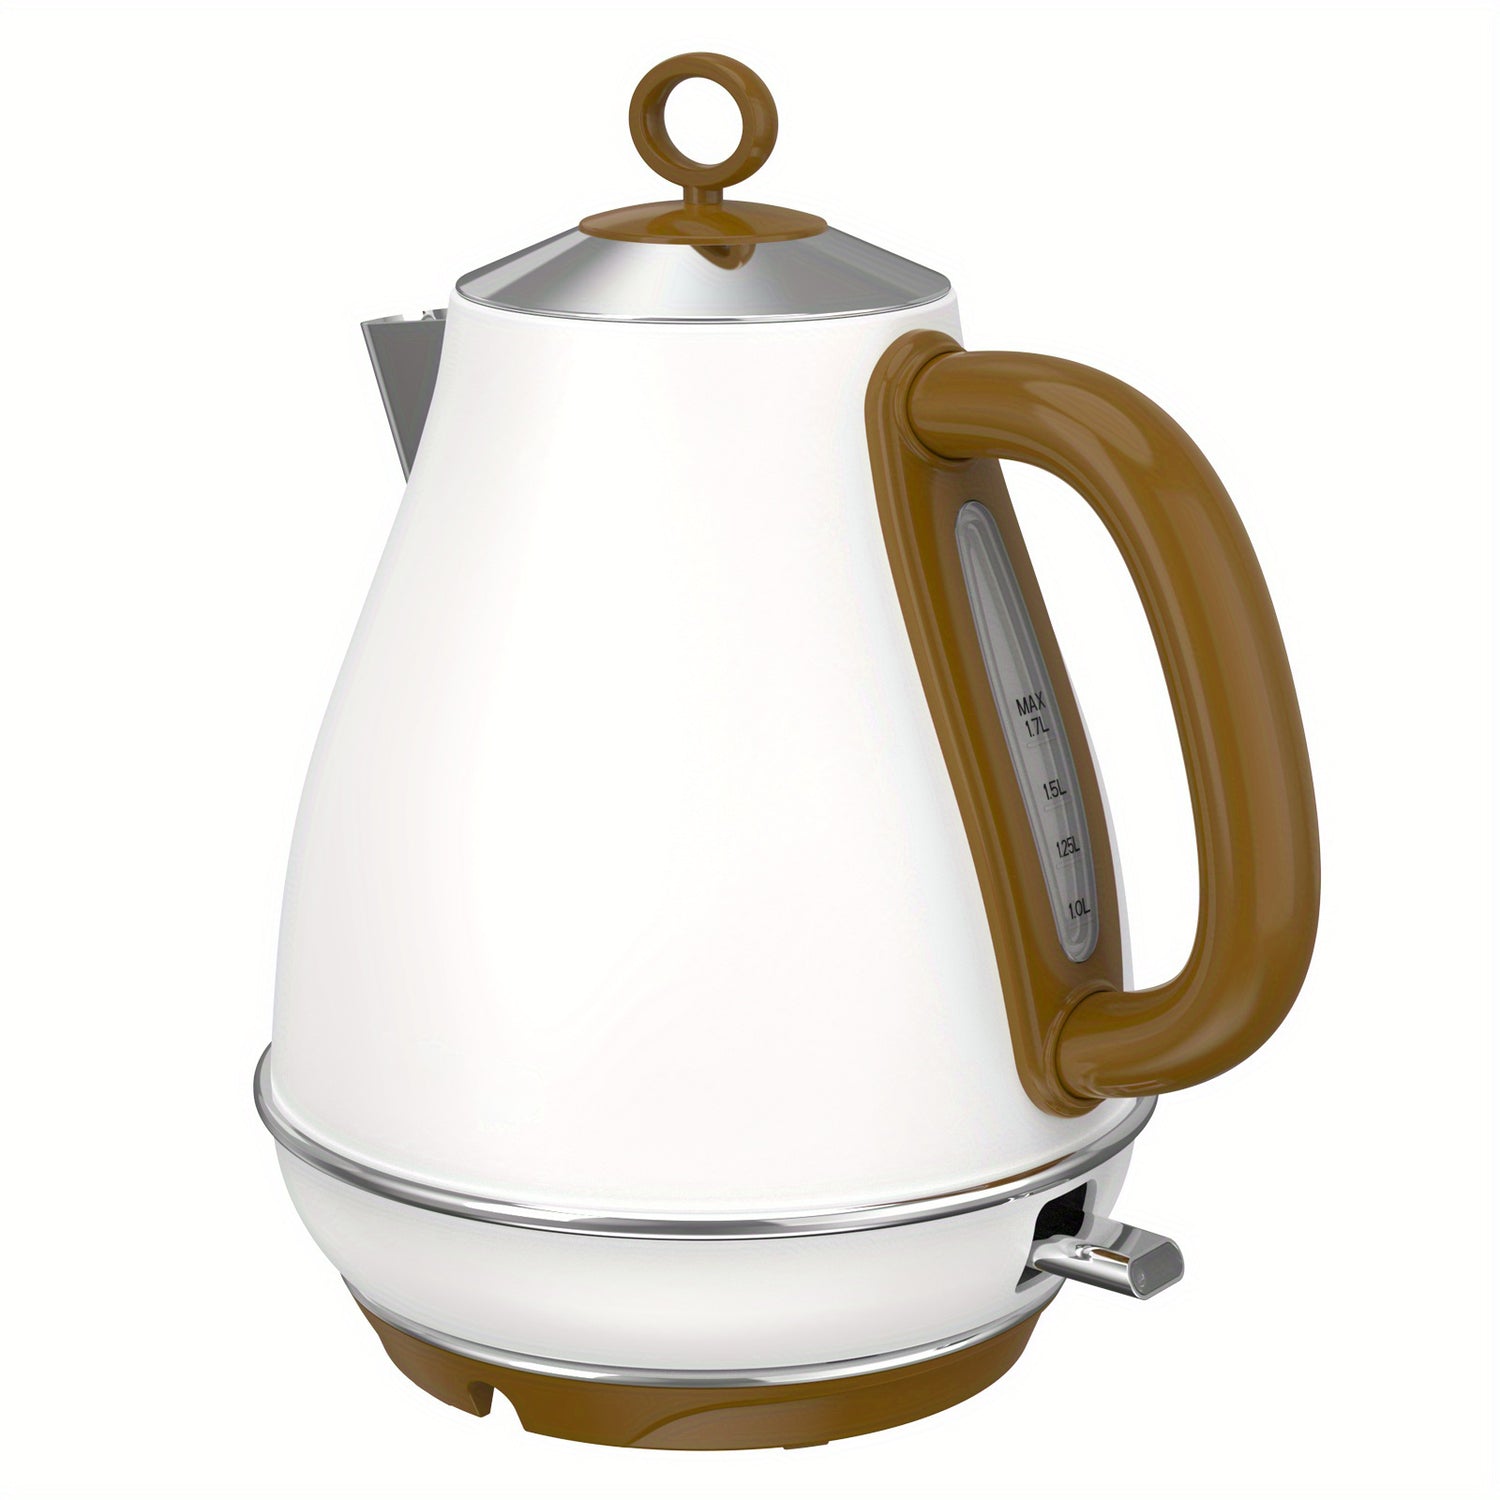 A high-quality electric kettle with an elegant design.